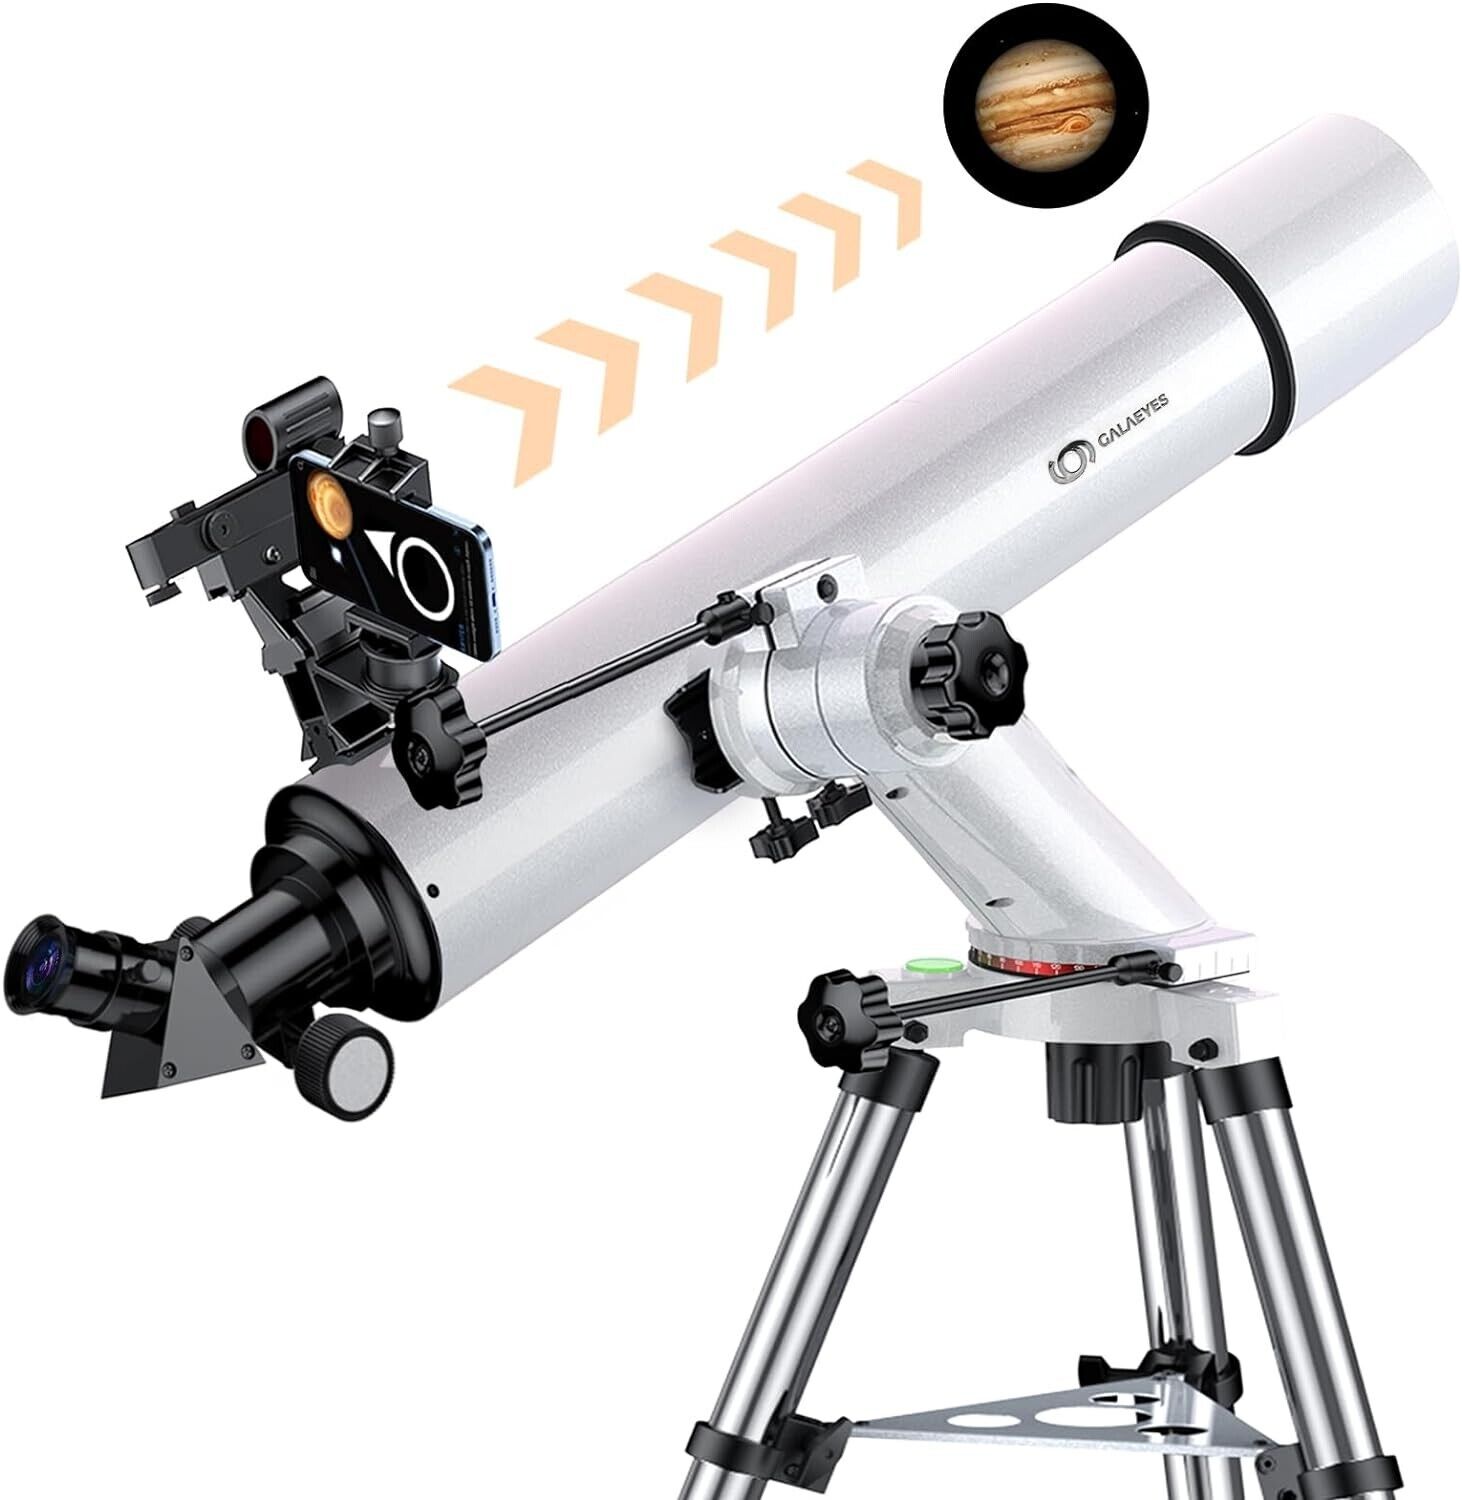 Telescope,100mm Aperture 900mm FL w/Star-Finding System for iOS/Android, White